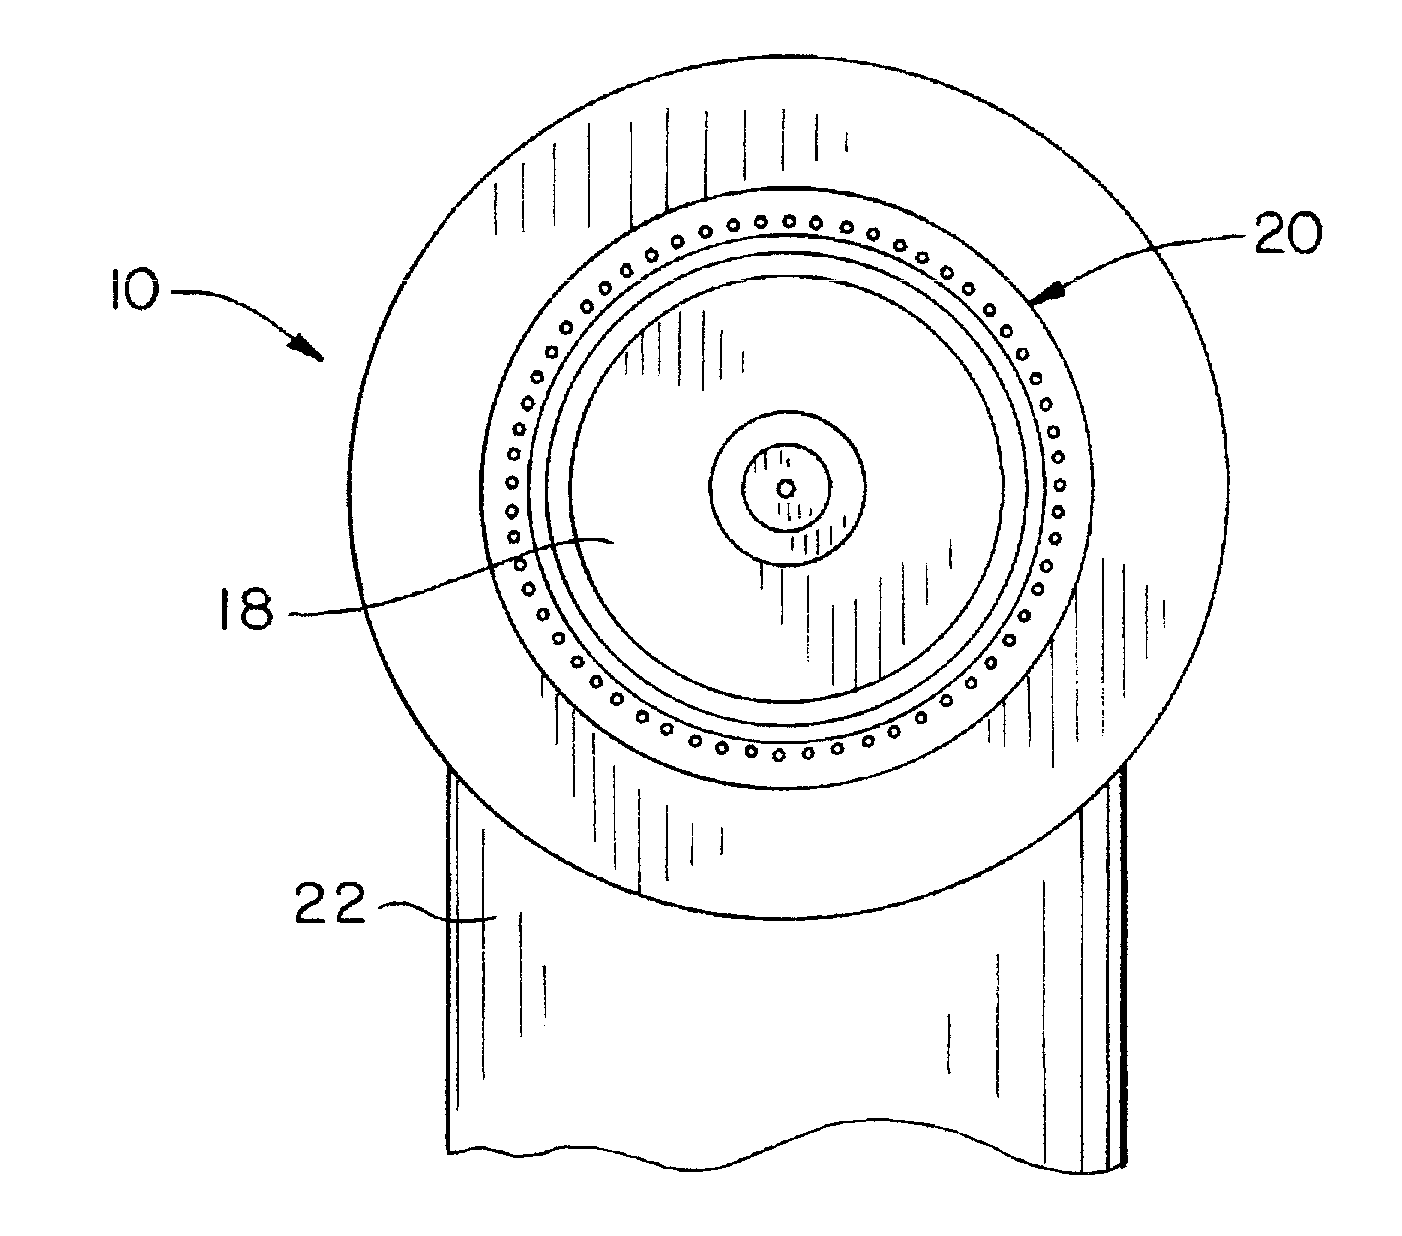 Bell cup cleaning system and method